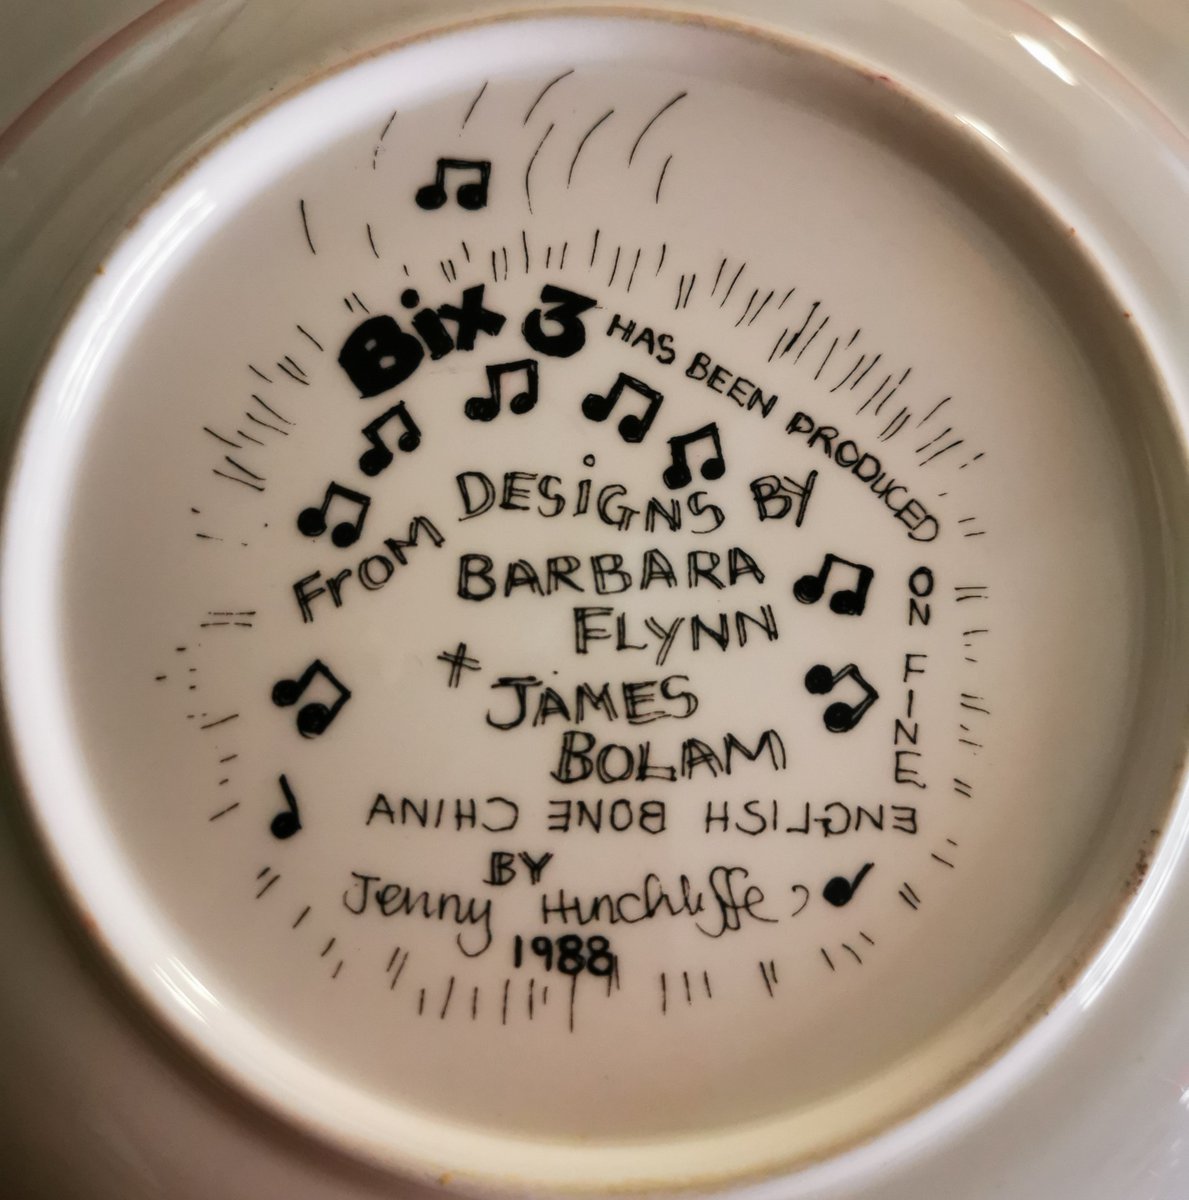 Random find of the day - a Beiderbecke Connection bowl designed by none other than James Bolam and Barbara Flynn at an antiques shop. #beiderbecke #yorkshiretelevision #jennyhinchcliffe